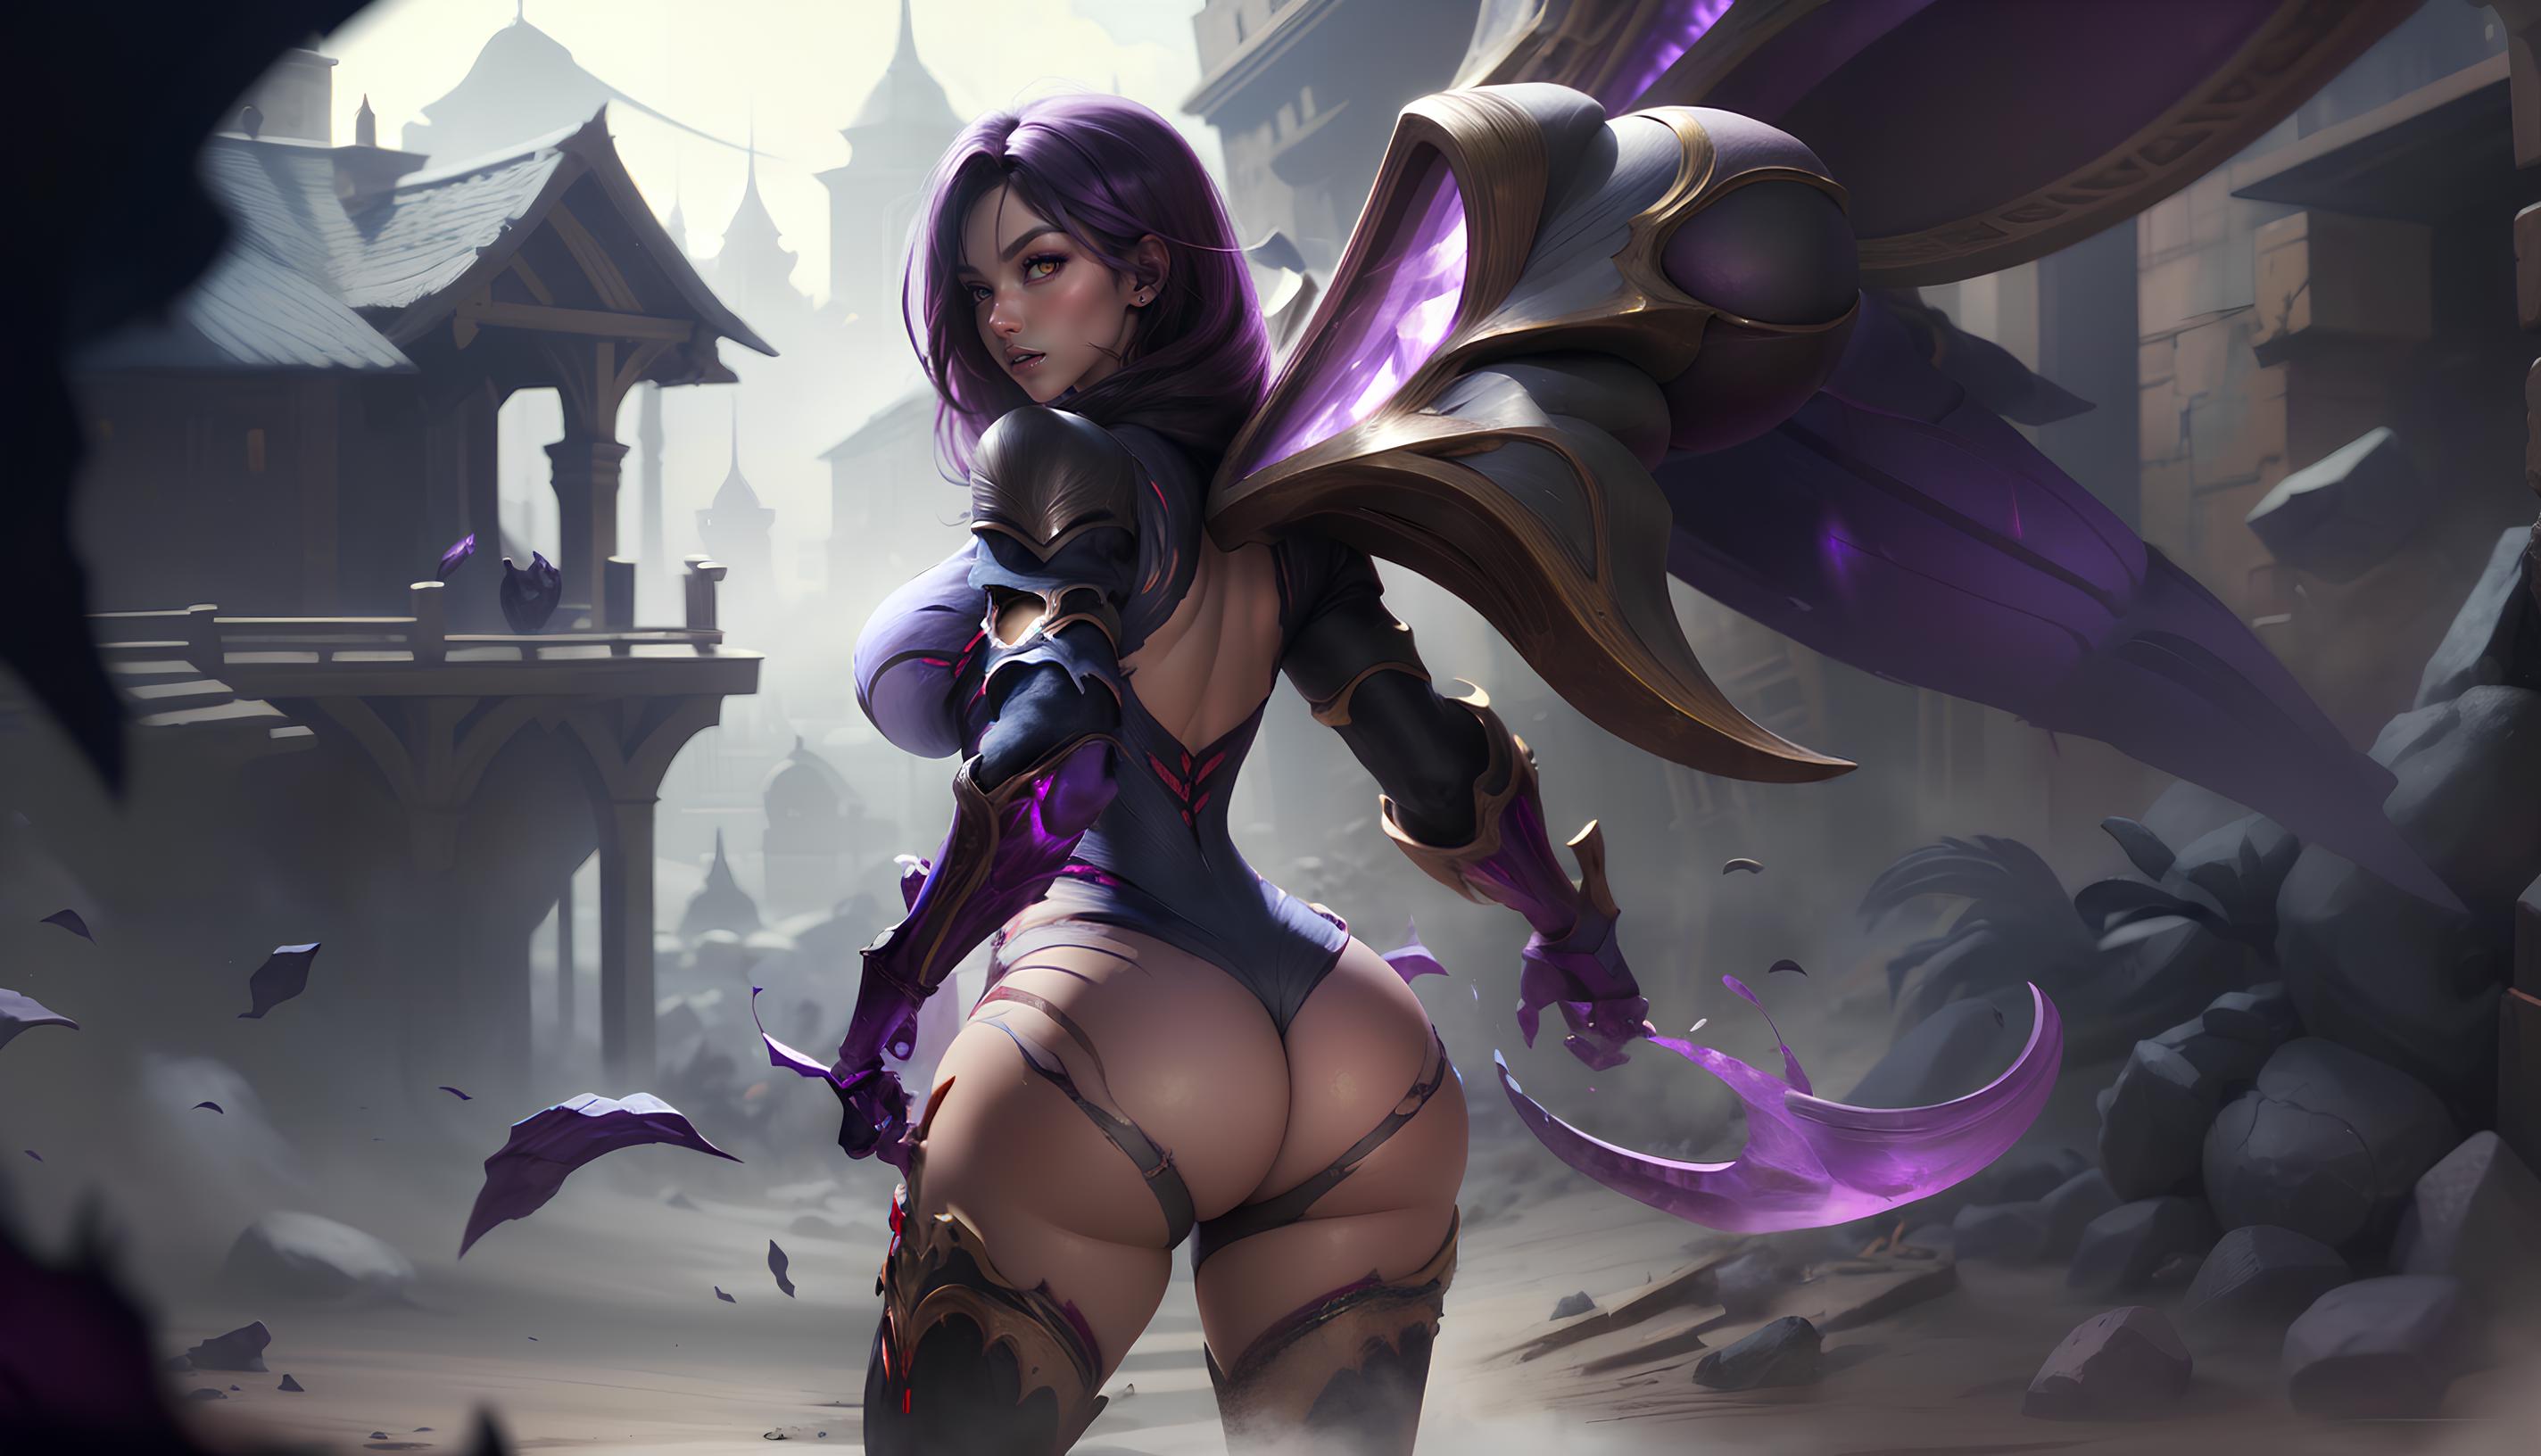 Kai'sa from League of Legends image by league64